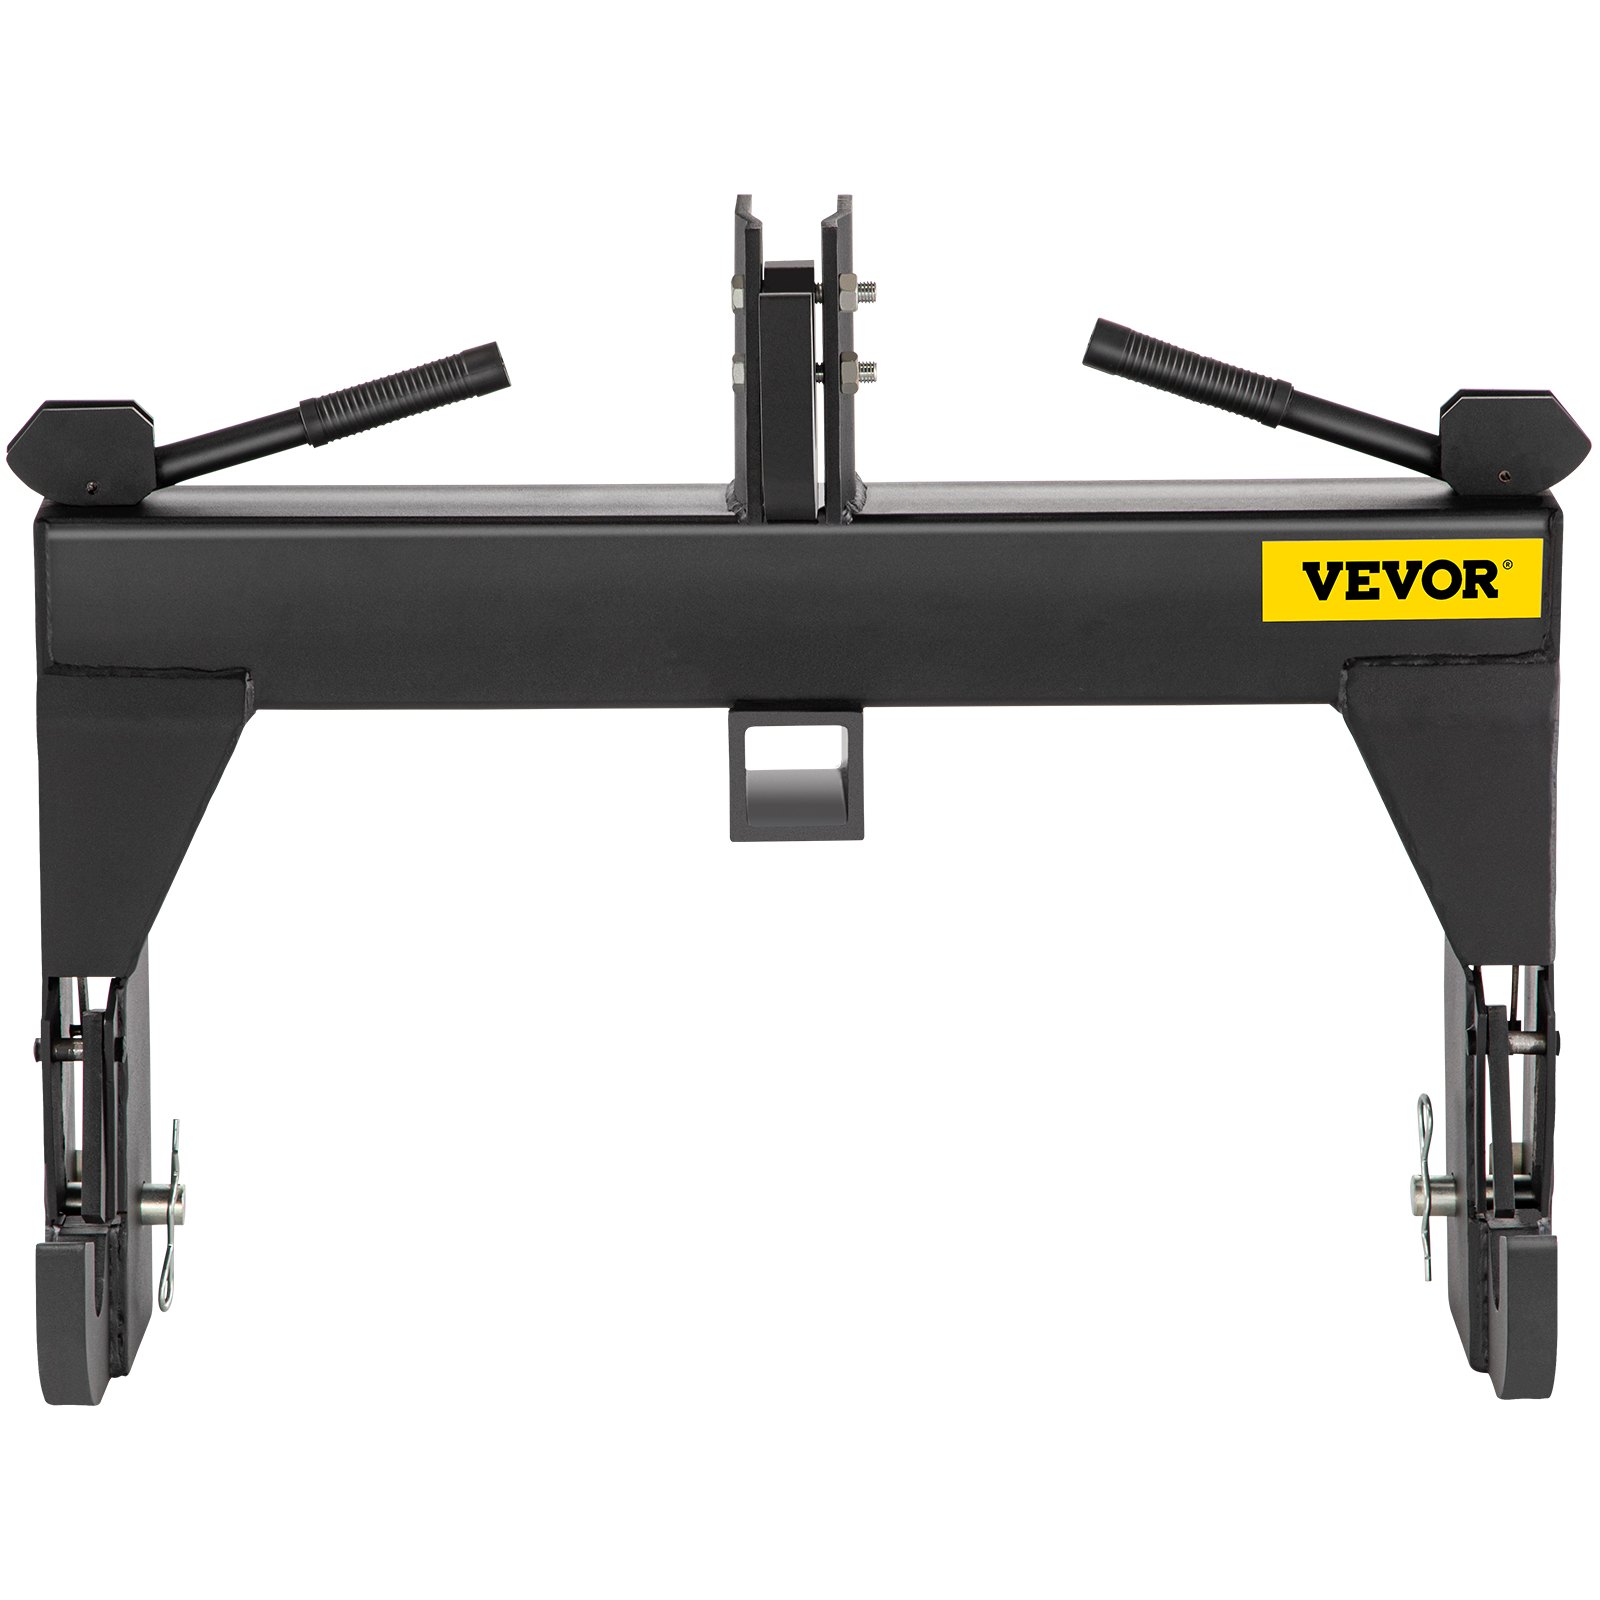 VEVOR 3-Point Quick Hitch, 3000 LBS Lifting Capacity Tractor Quick ...